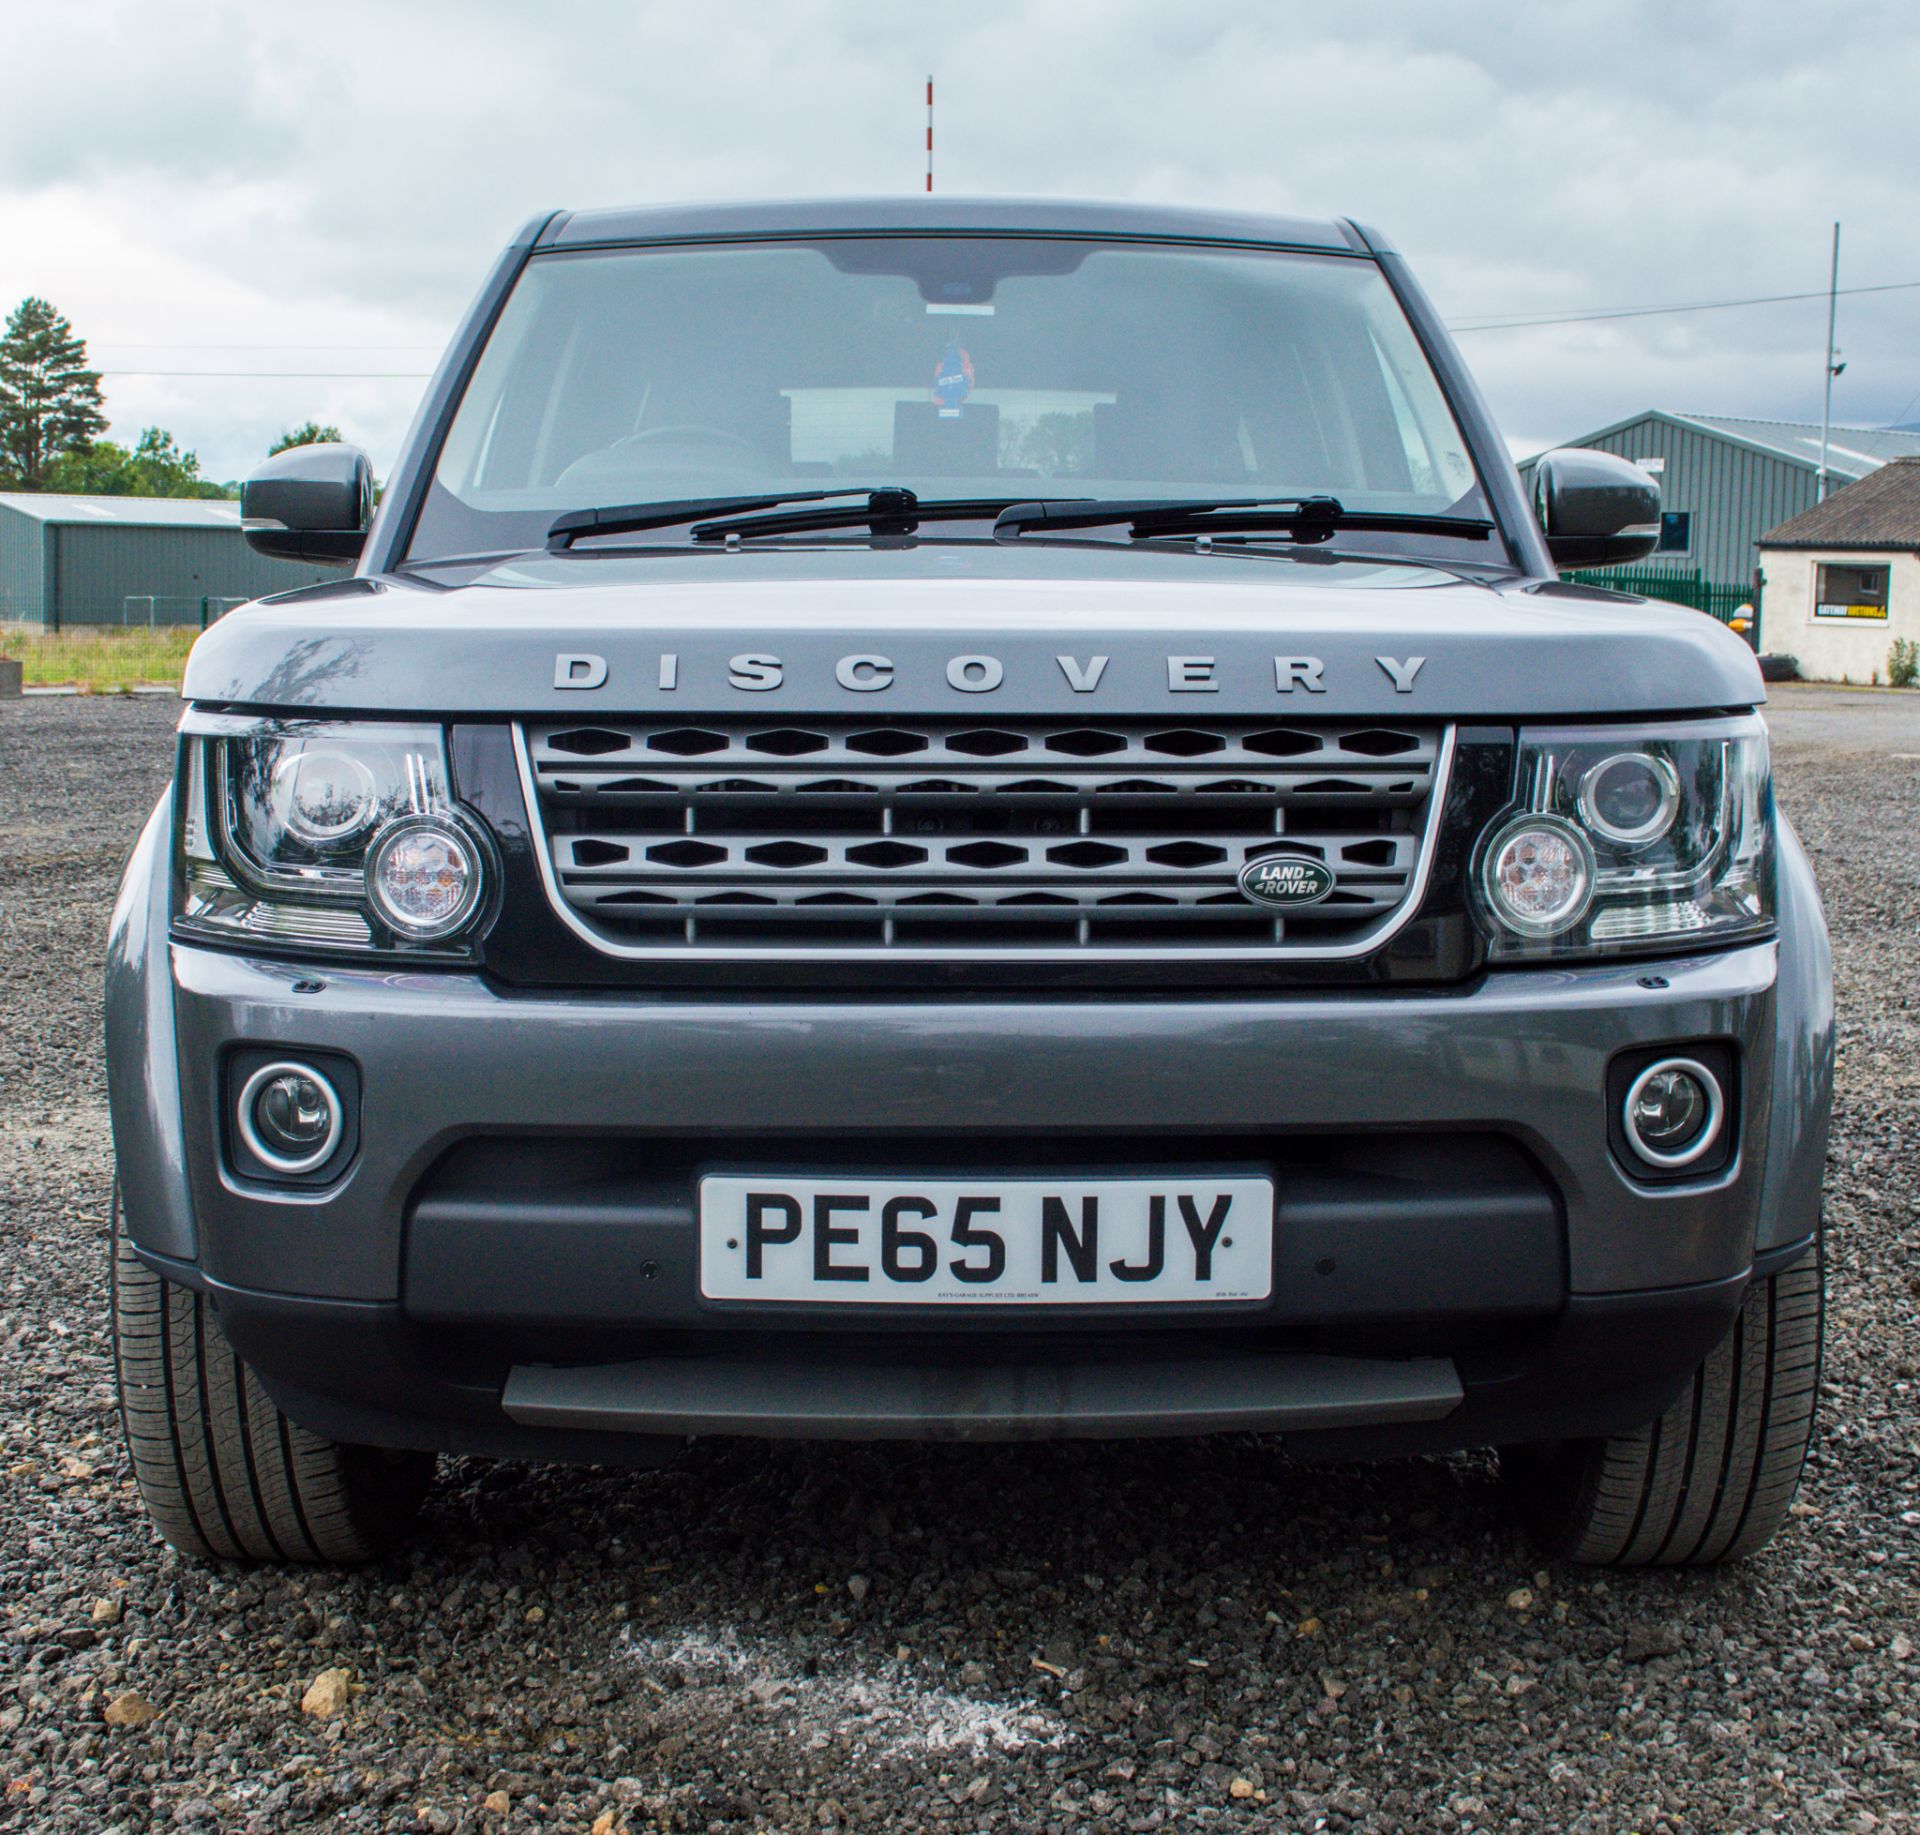 Land Rover Discovery 4 SE 3.0 TDV6 Commercial 4 wheel drive utility vehicle  Reg No: PE 65 NJY  Date - Image 5 of 23